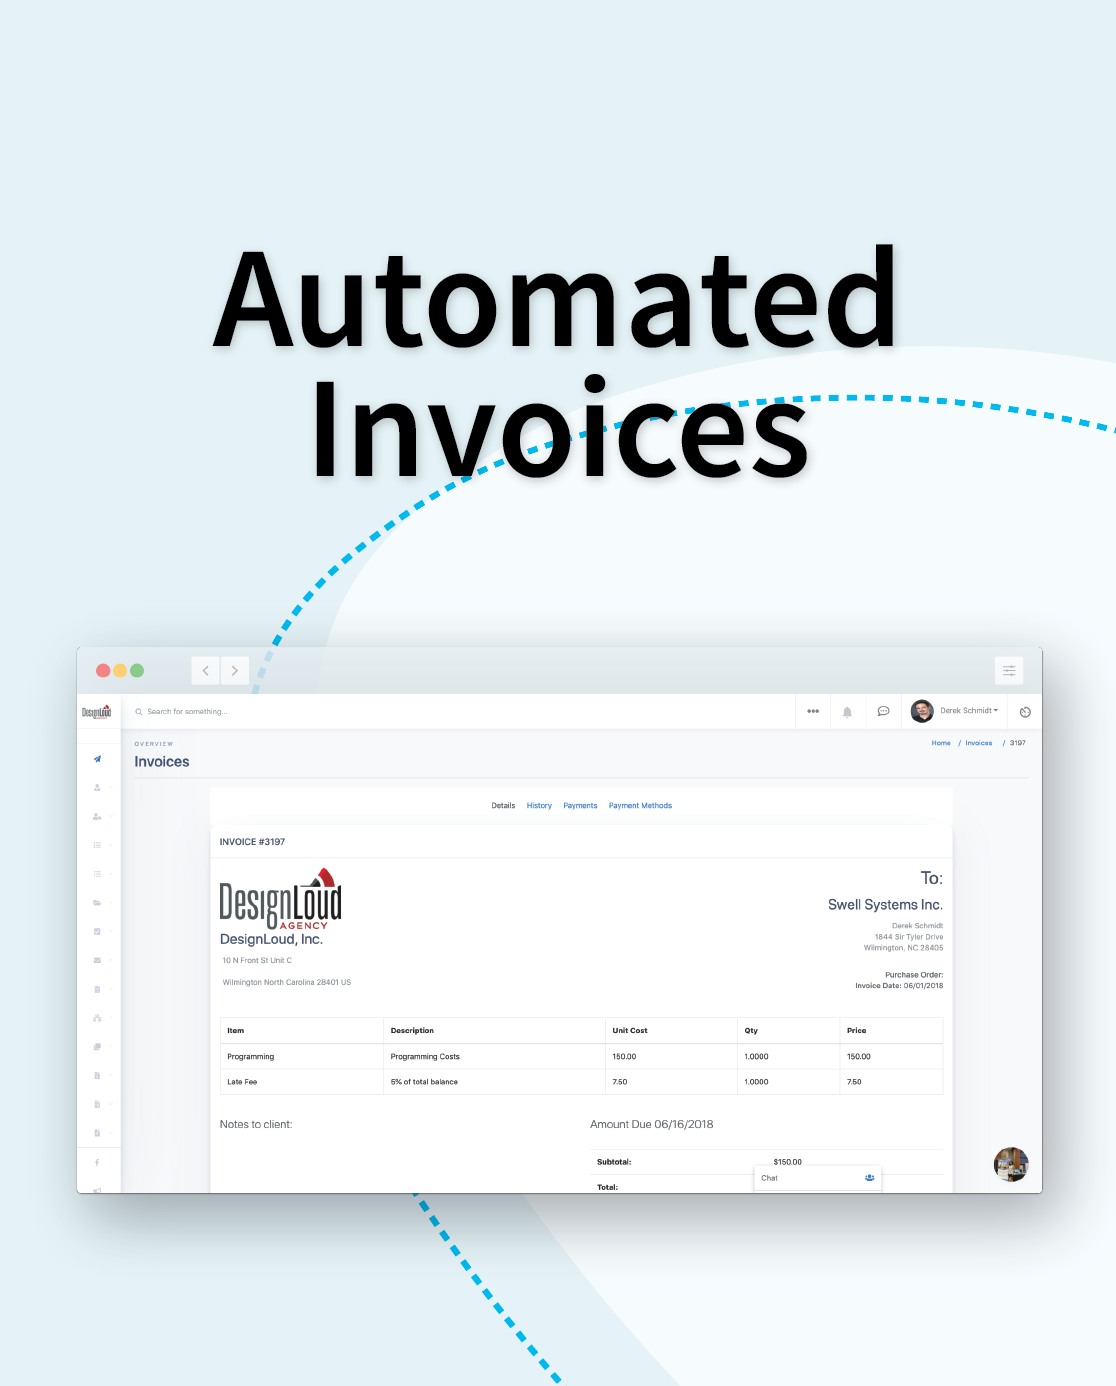 Automated, Recurring Invoices with Autobilling